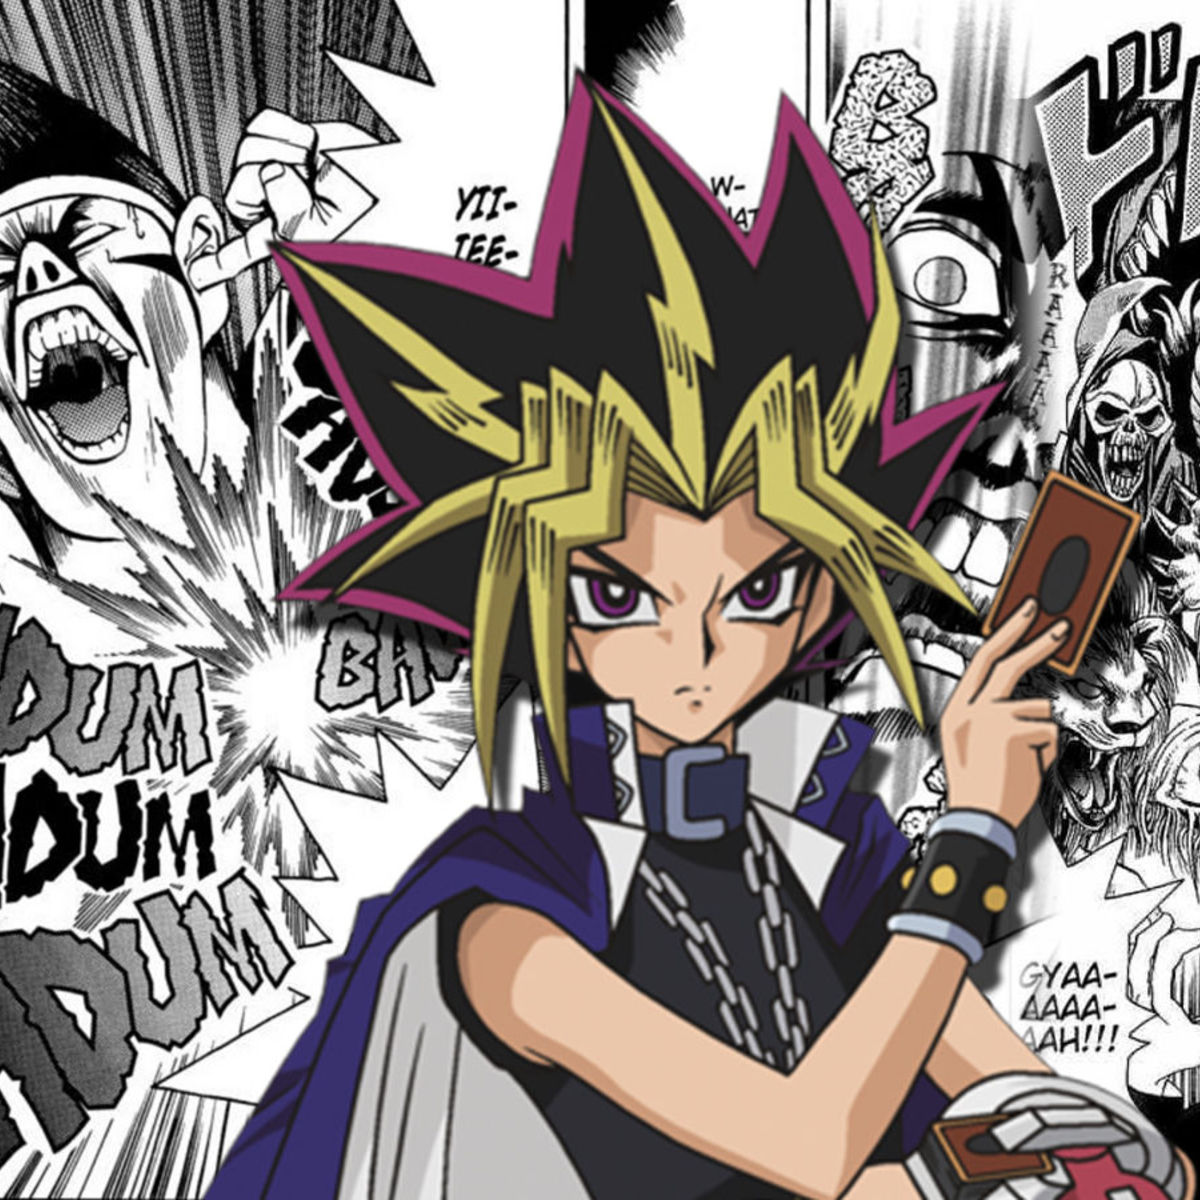 The Yu Gi Oh Manga Is Much More Dark And Insane Than You Might Think